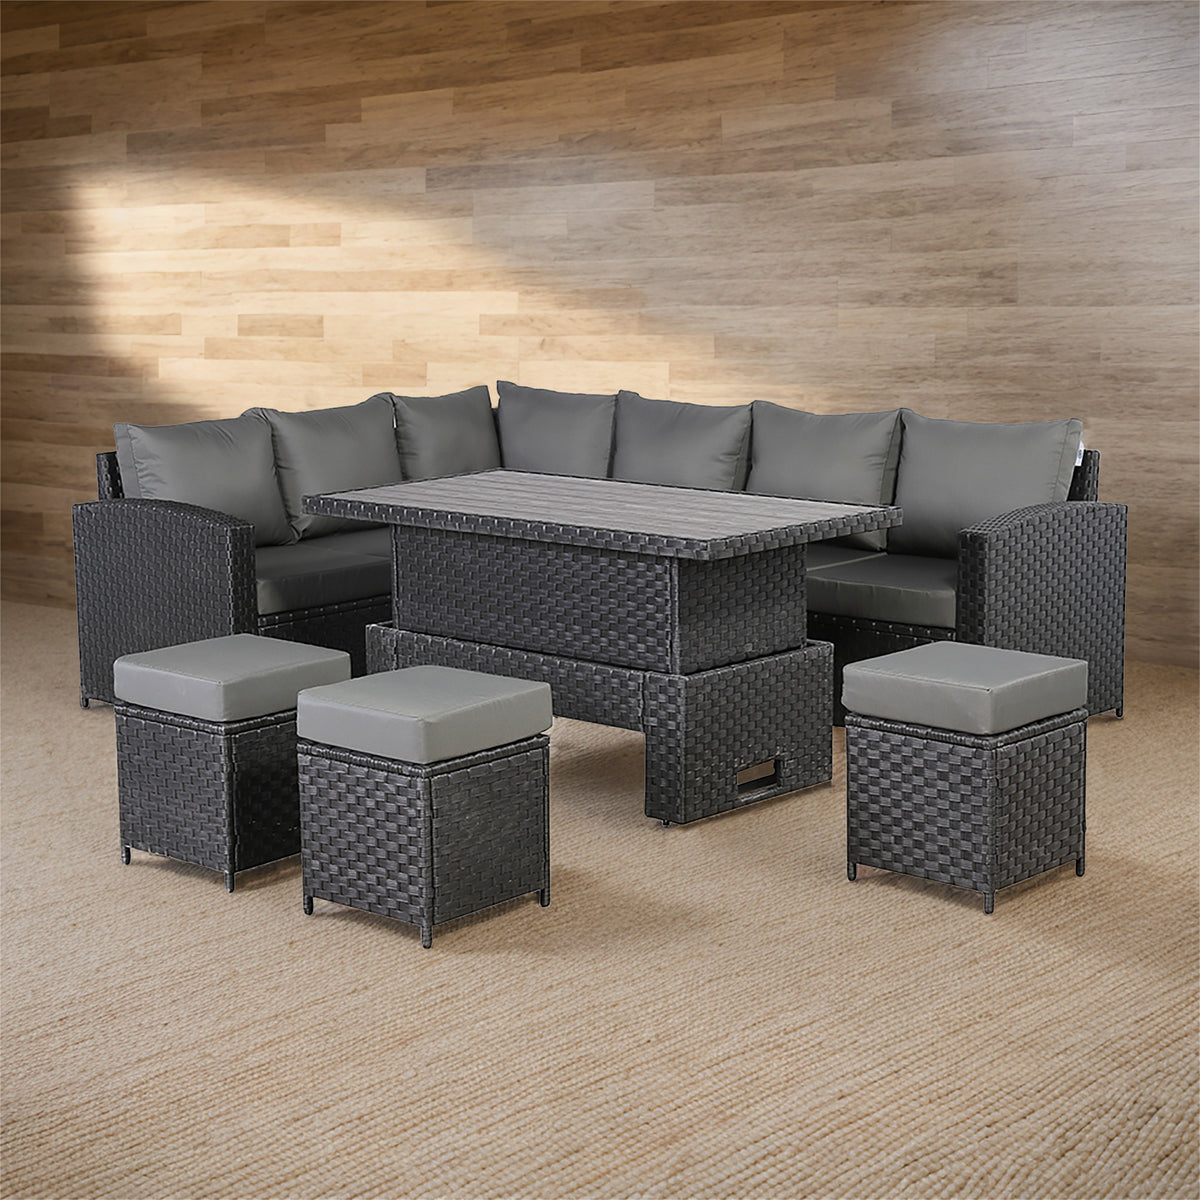 Primo Range High Back LHF Dining Corner Sofa Set in Black Weave with Rising Table